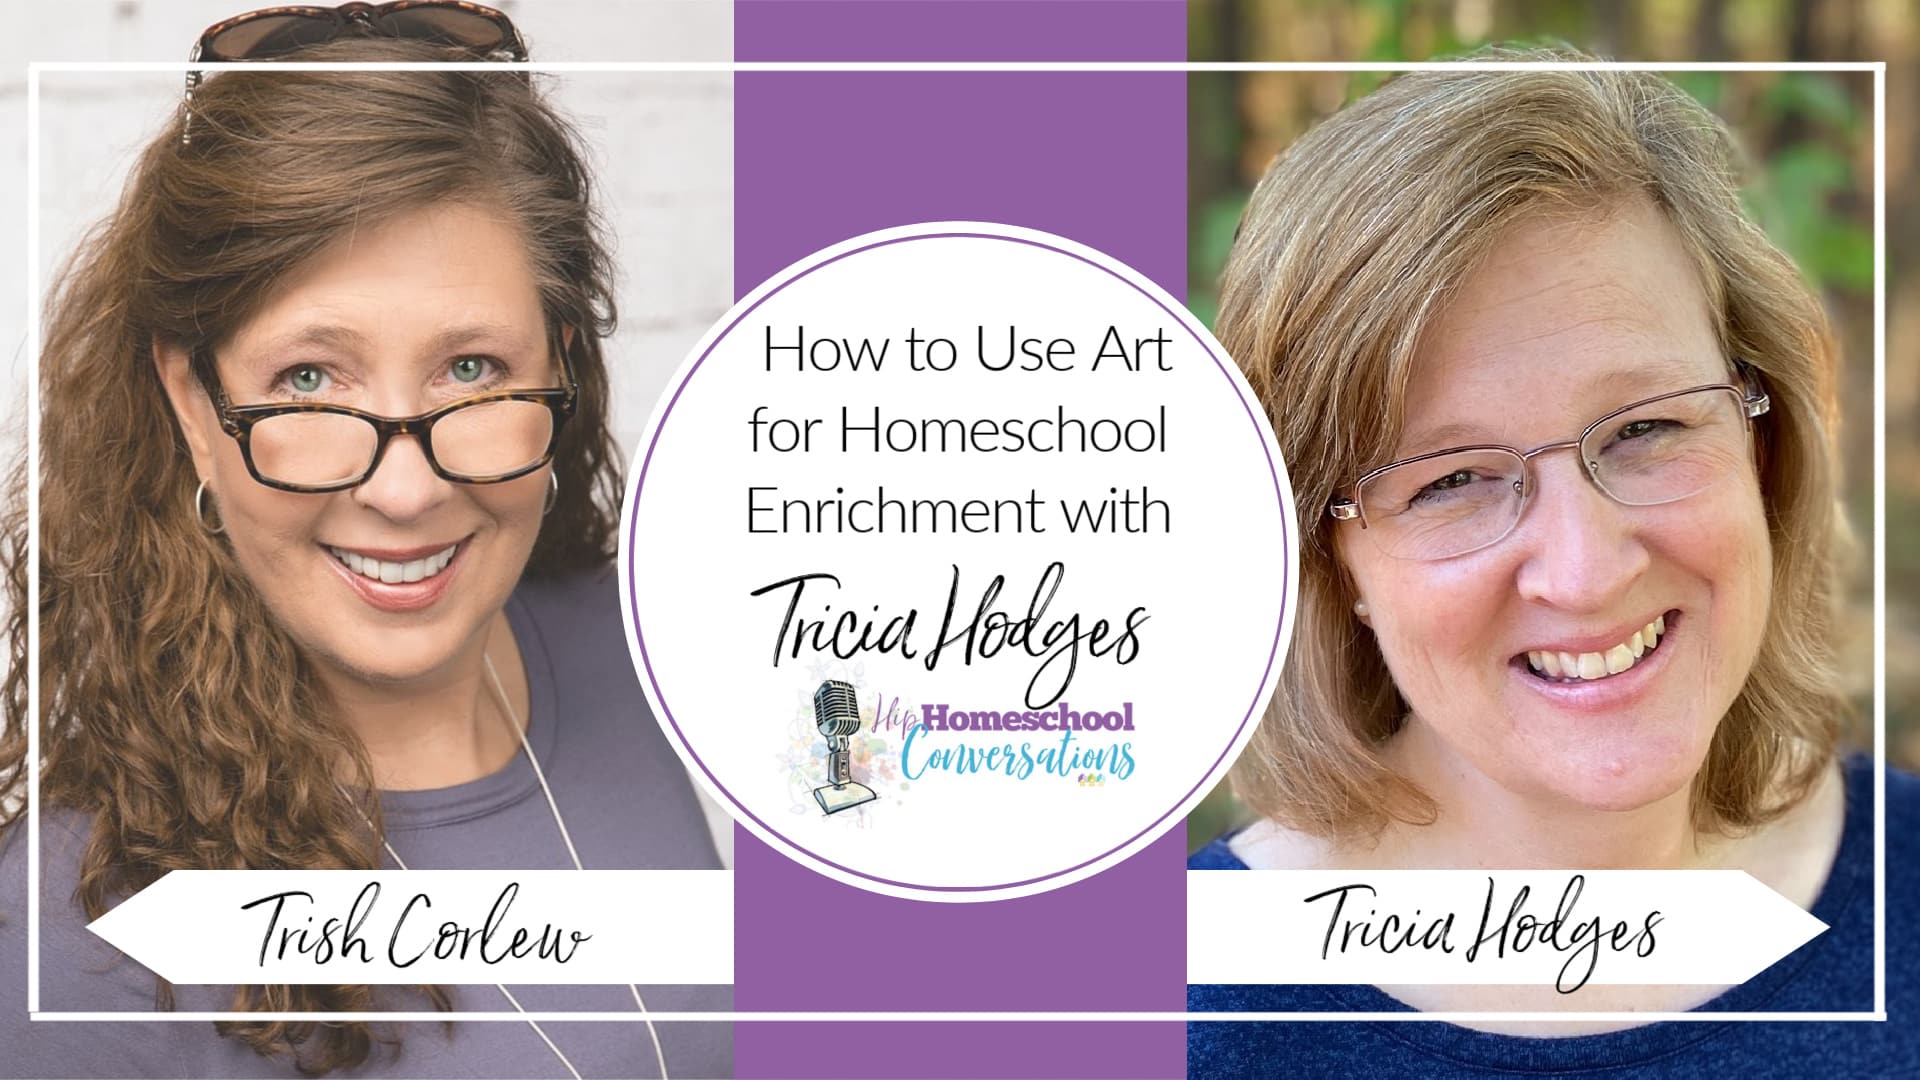 If you feel that incorporating art into your homeschool is too messy and overwhelming, Tricia Hodges has the solution to your problem! Join us as Tricia discusses how finding subjects that all of your students can do together can be challenging, but art is one way to bring everyone together to create homeschooling memories that you will cherish.